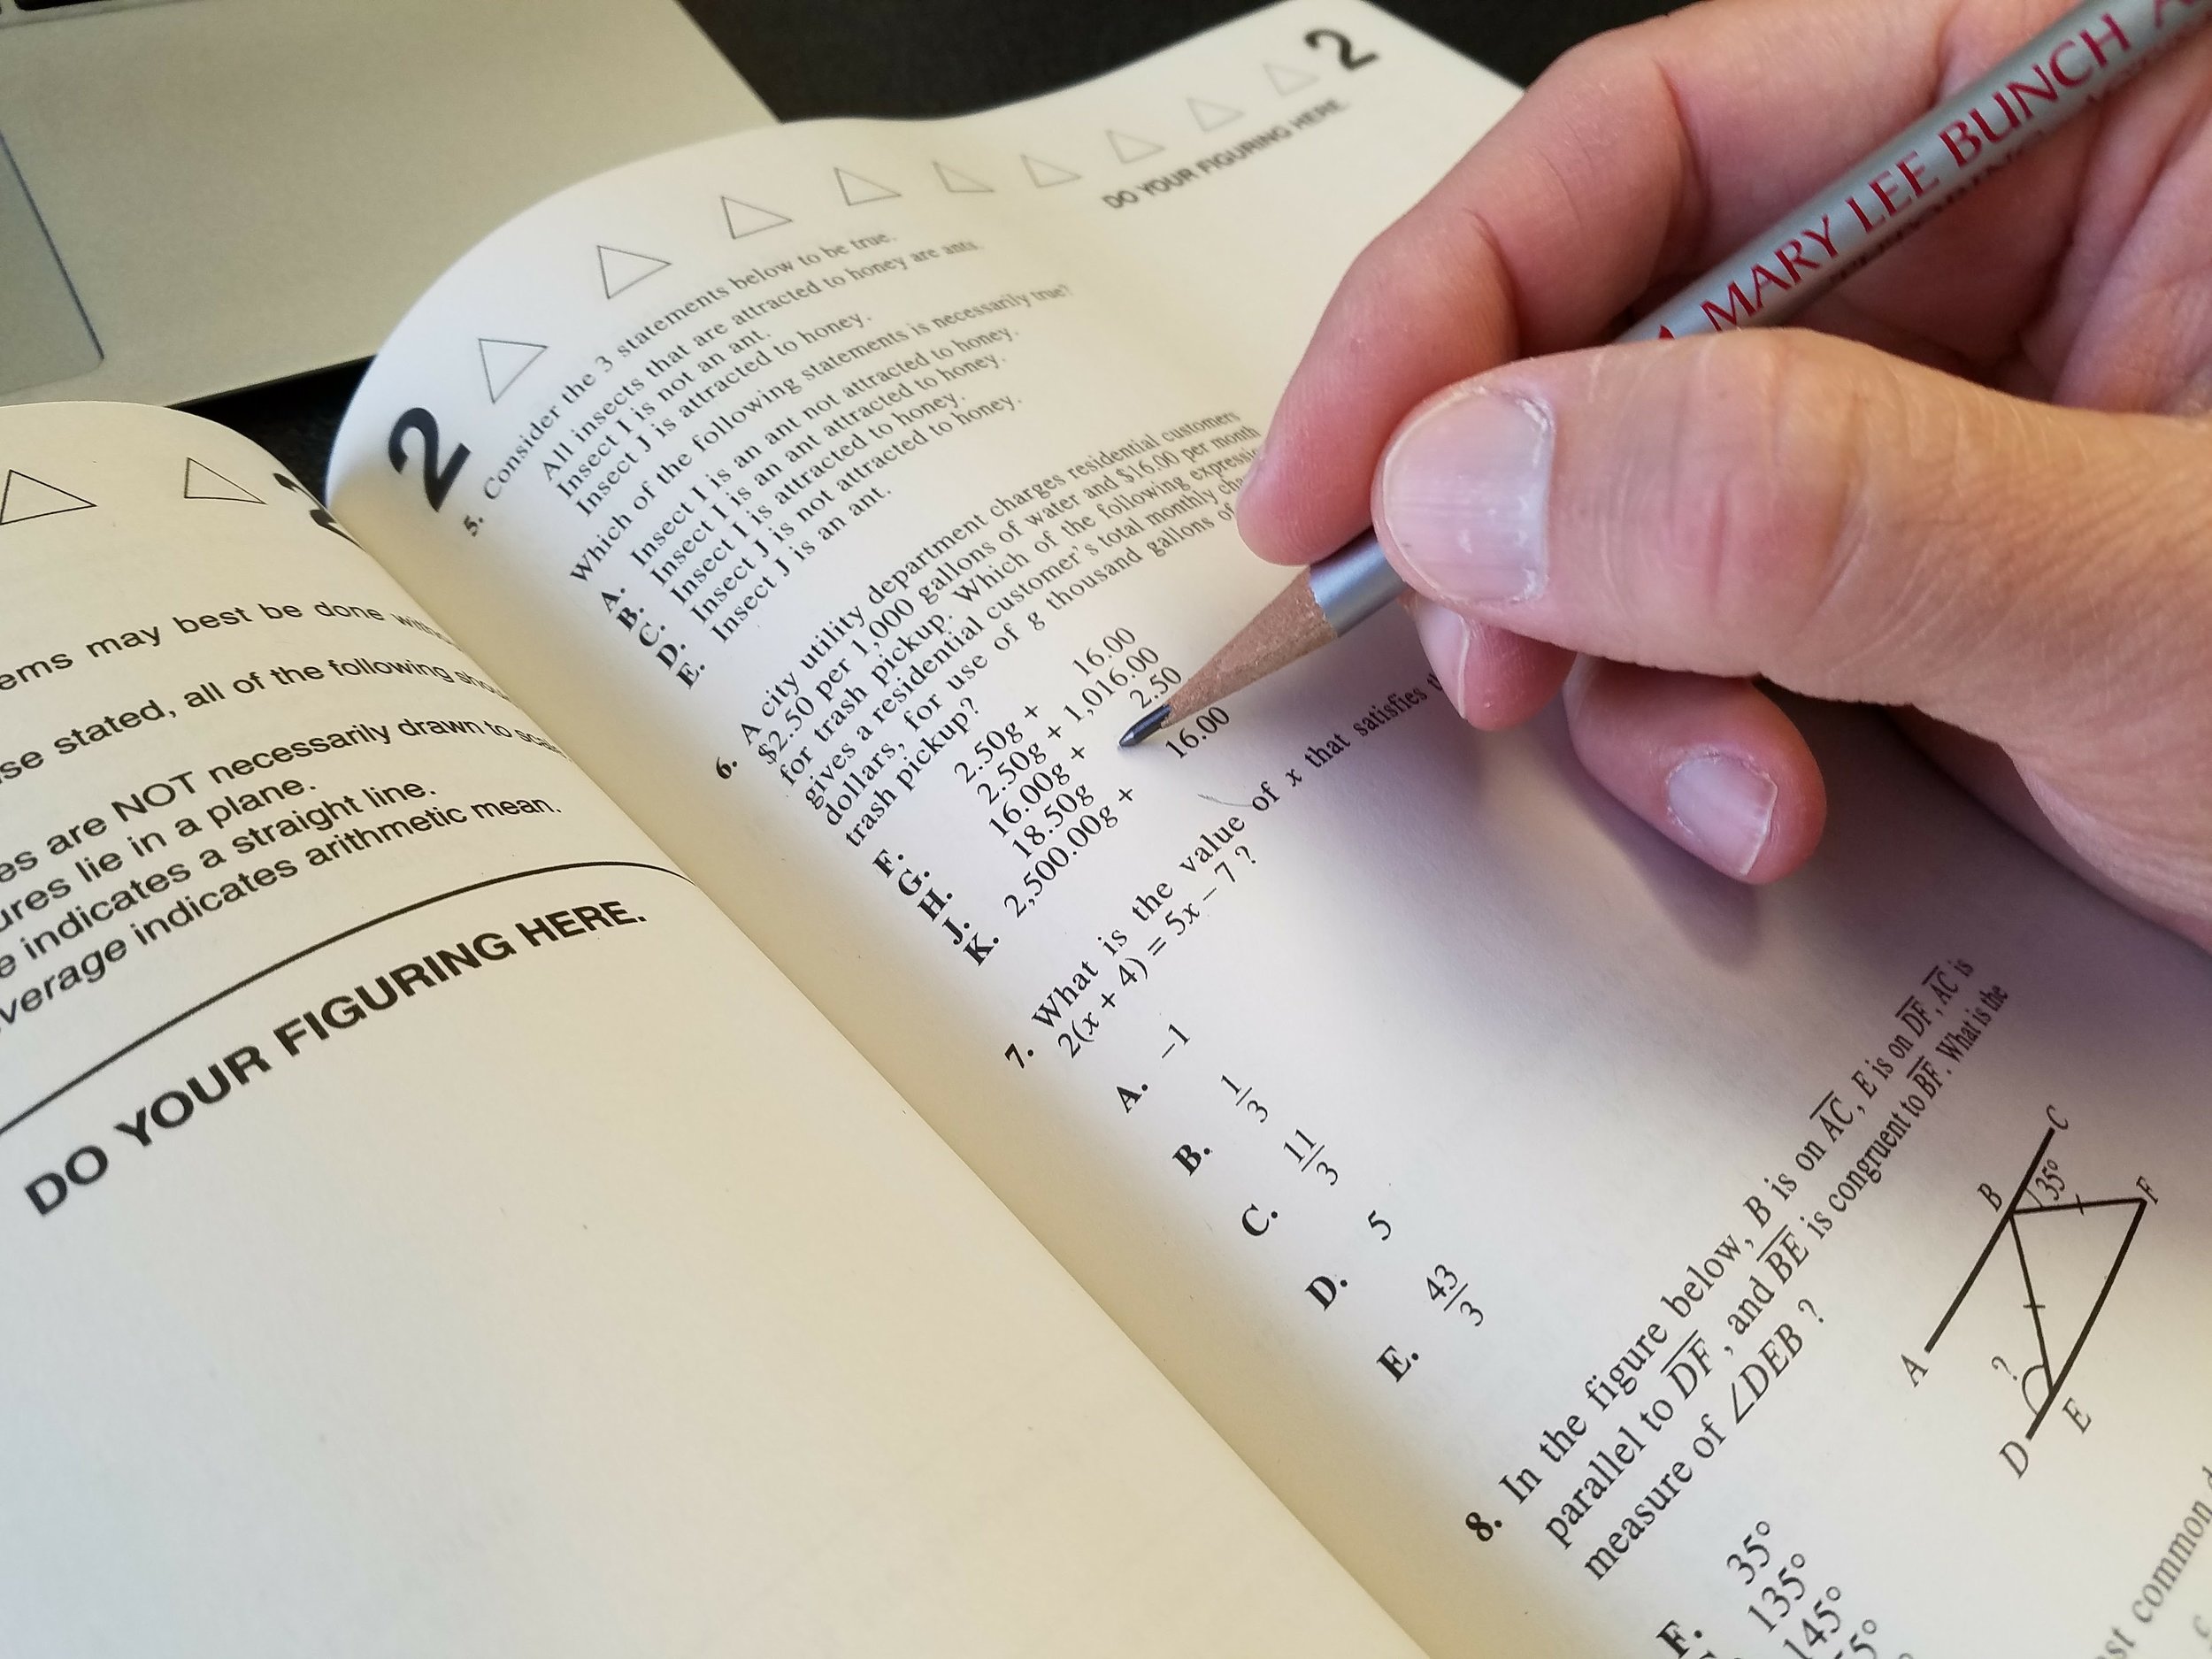 Person completing test questions in SAT prep book